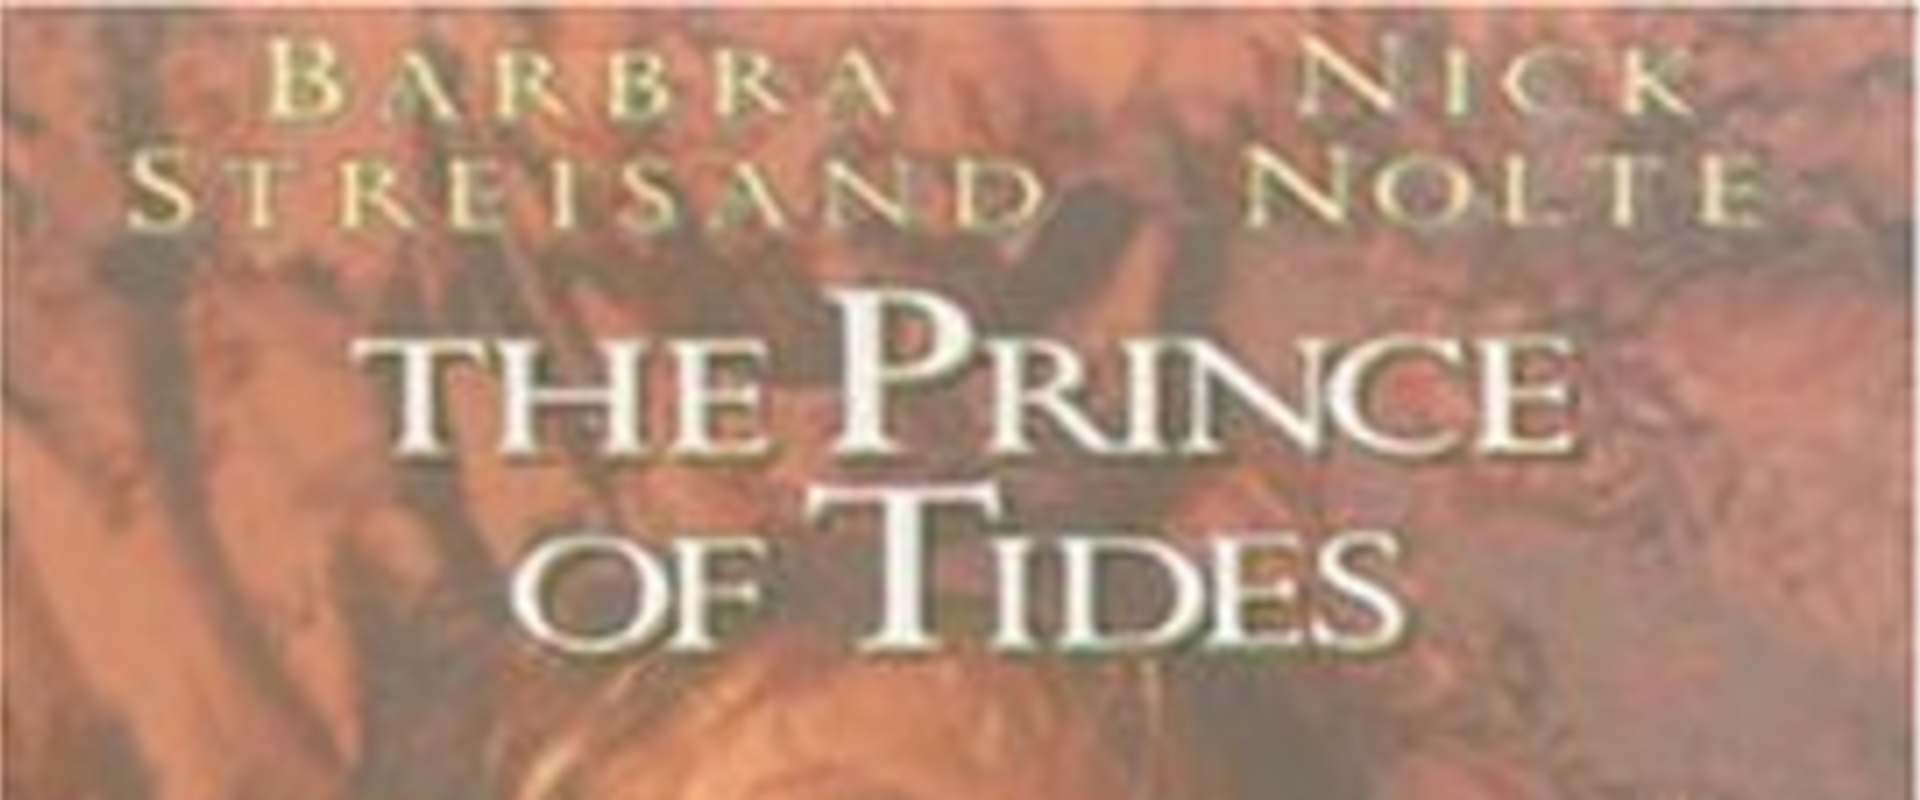 The Prince of Tides background 2